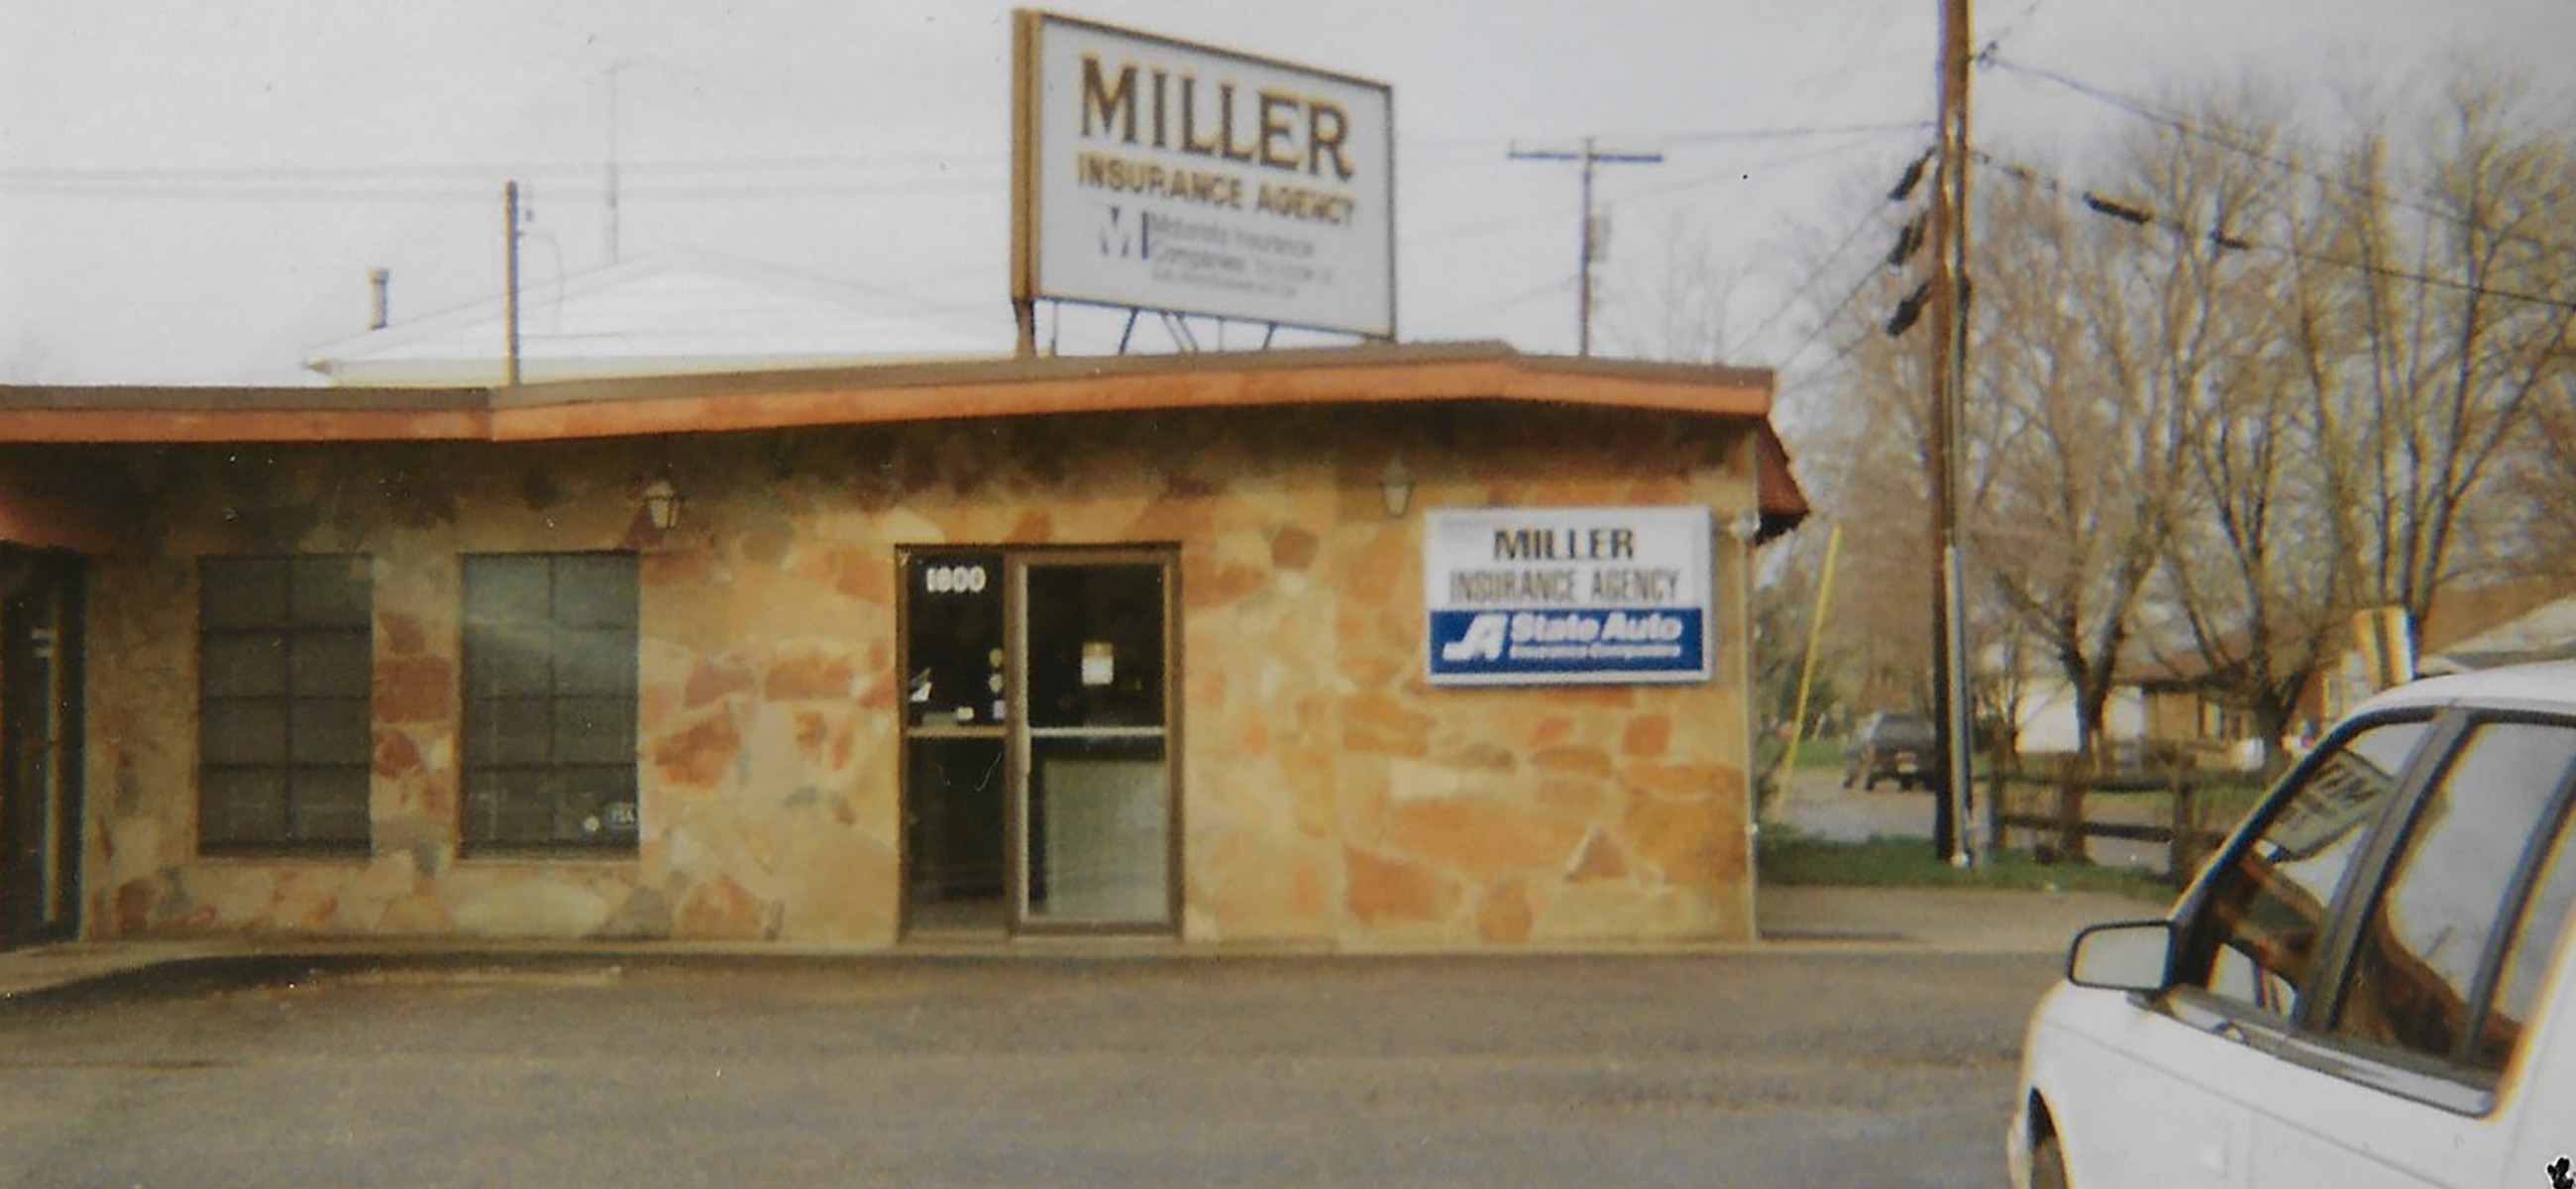 About Curtis Miller Insurance Agency pic